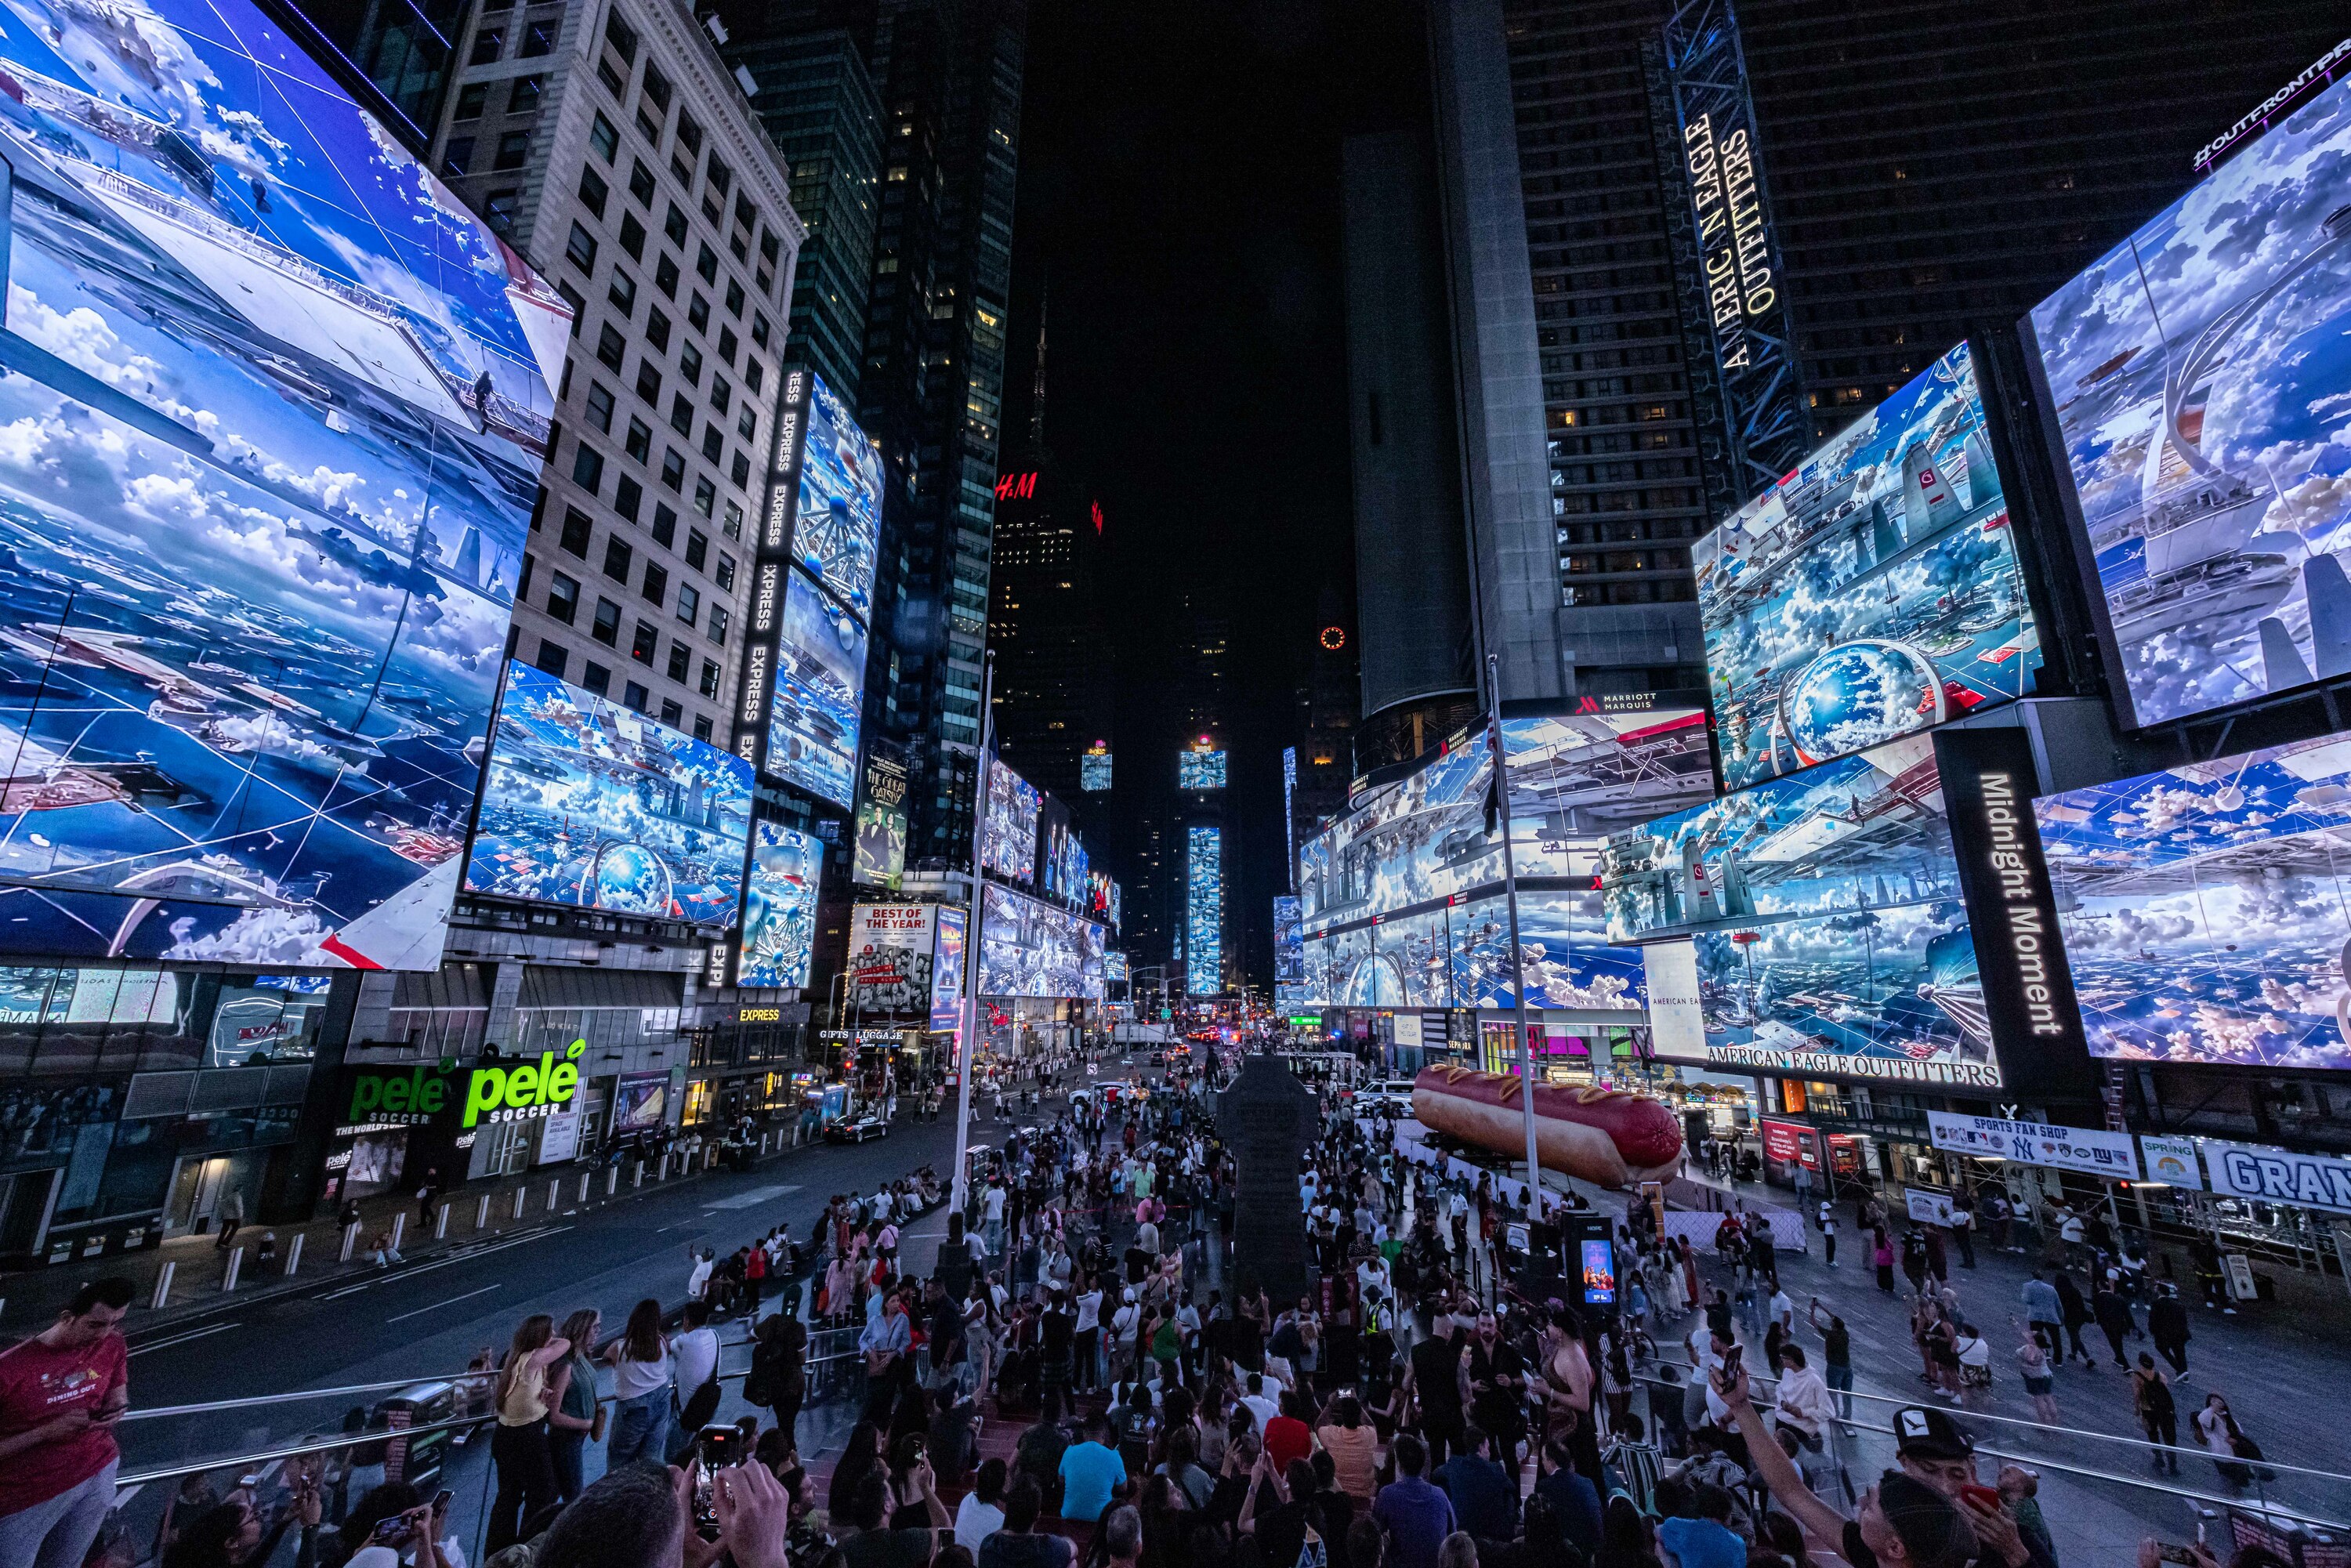 A reality-bending film will be broadcasted over 90 billboards in Times Square this month